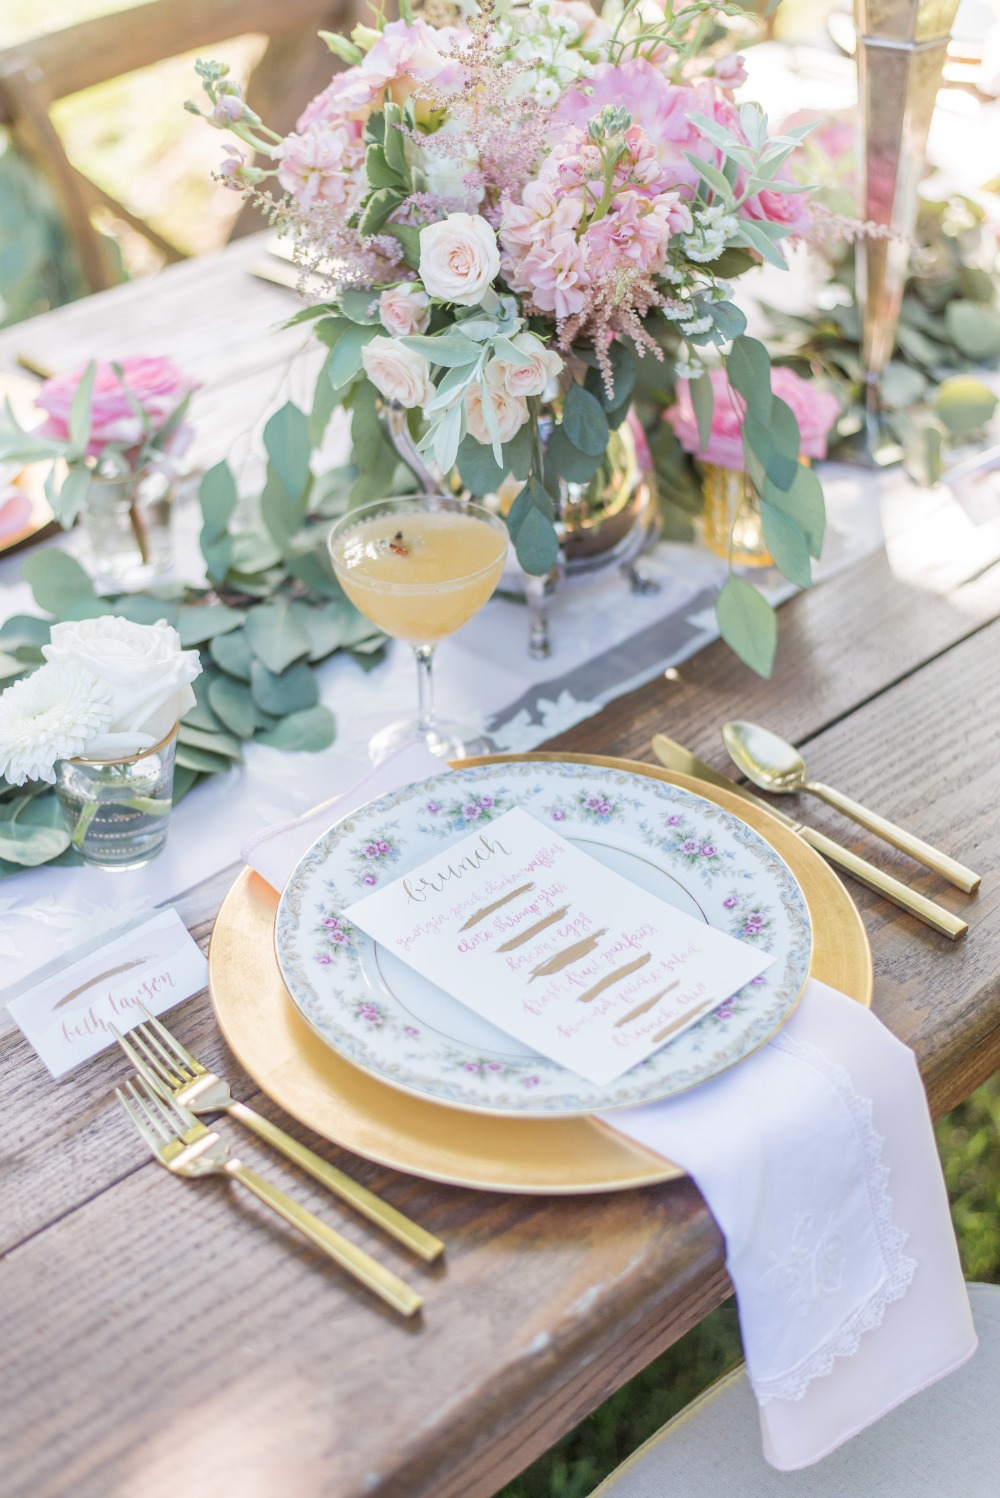 Vintage dishes and gold flatware